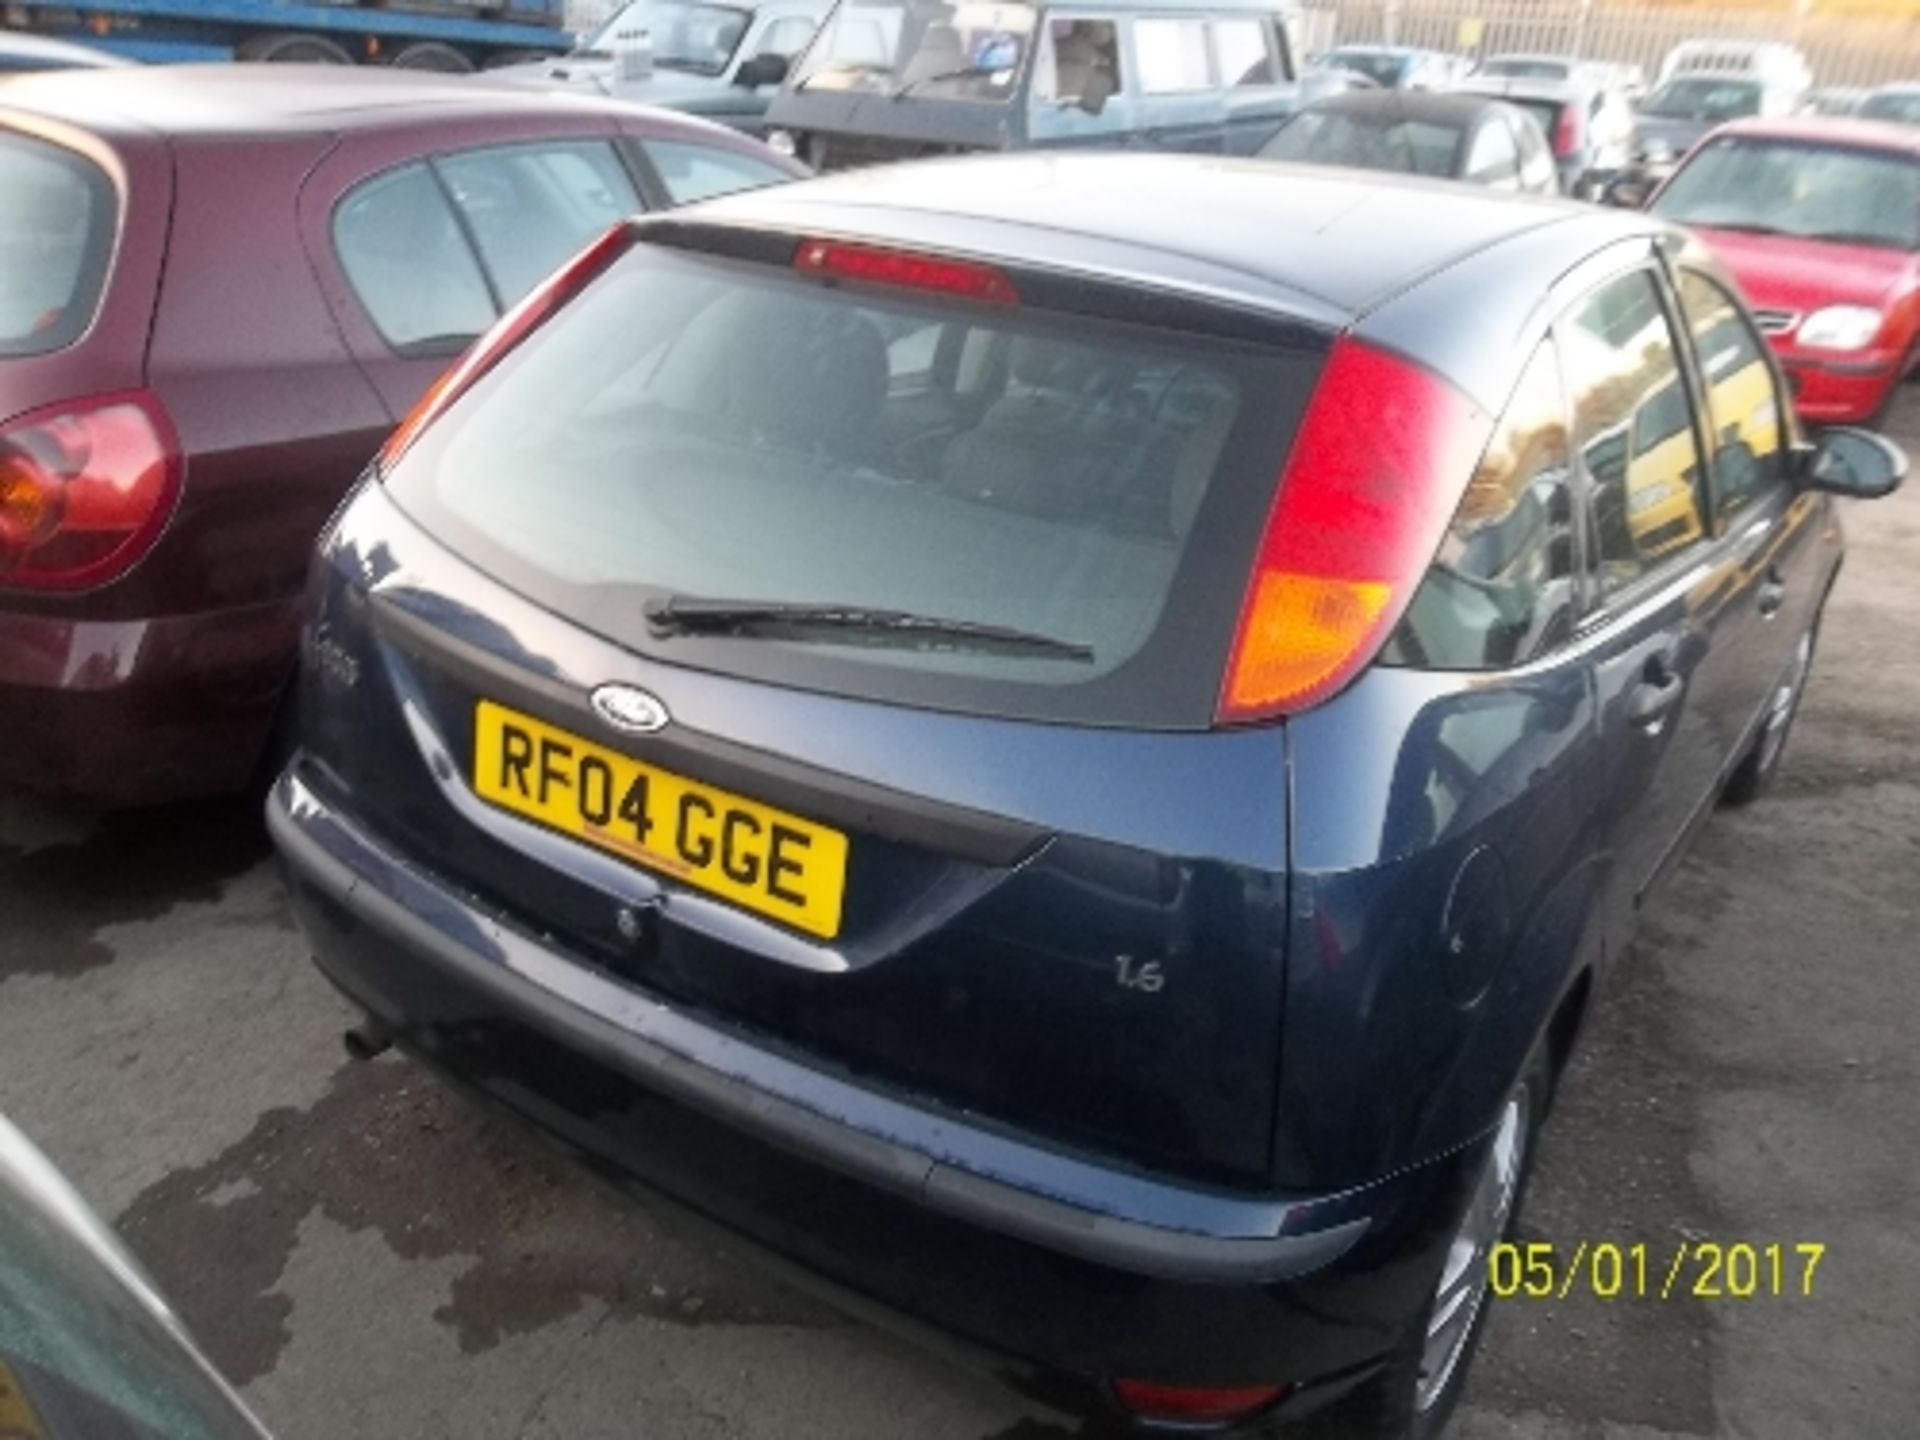 Ford Focus Zetec - RF04 GGE Date of registration: 08.07.2004 1596cc, petrol, 4 speed automatic, blue - Image 3 of 4